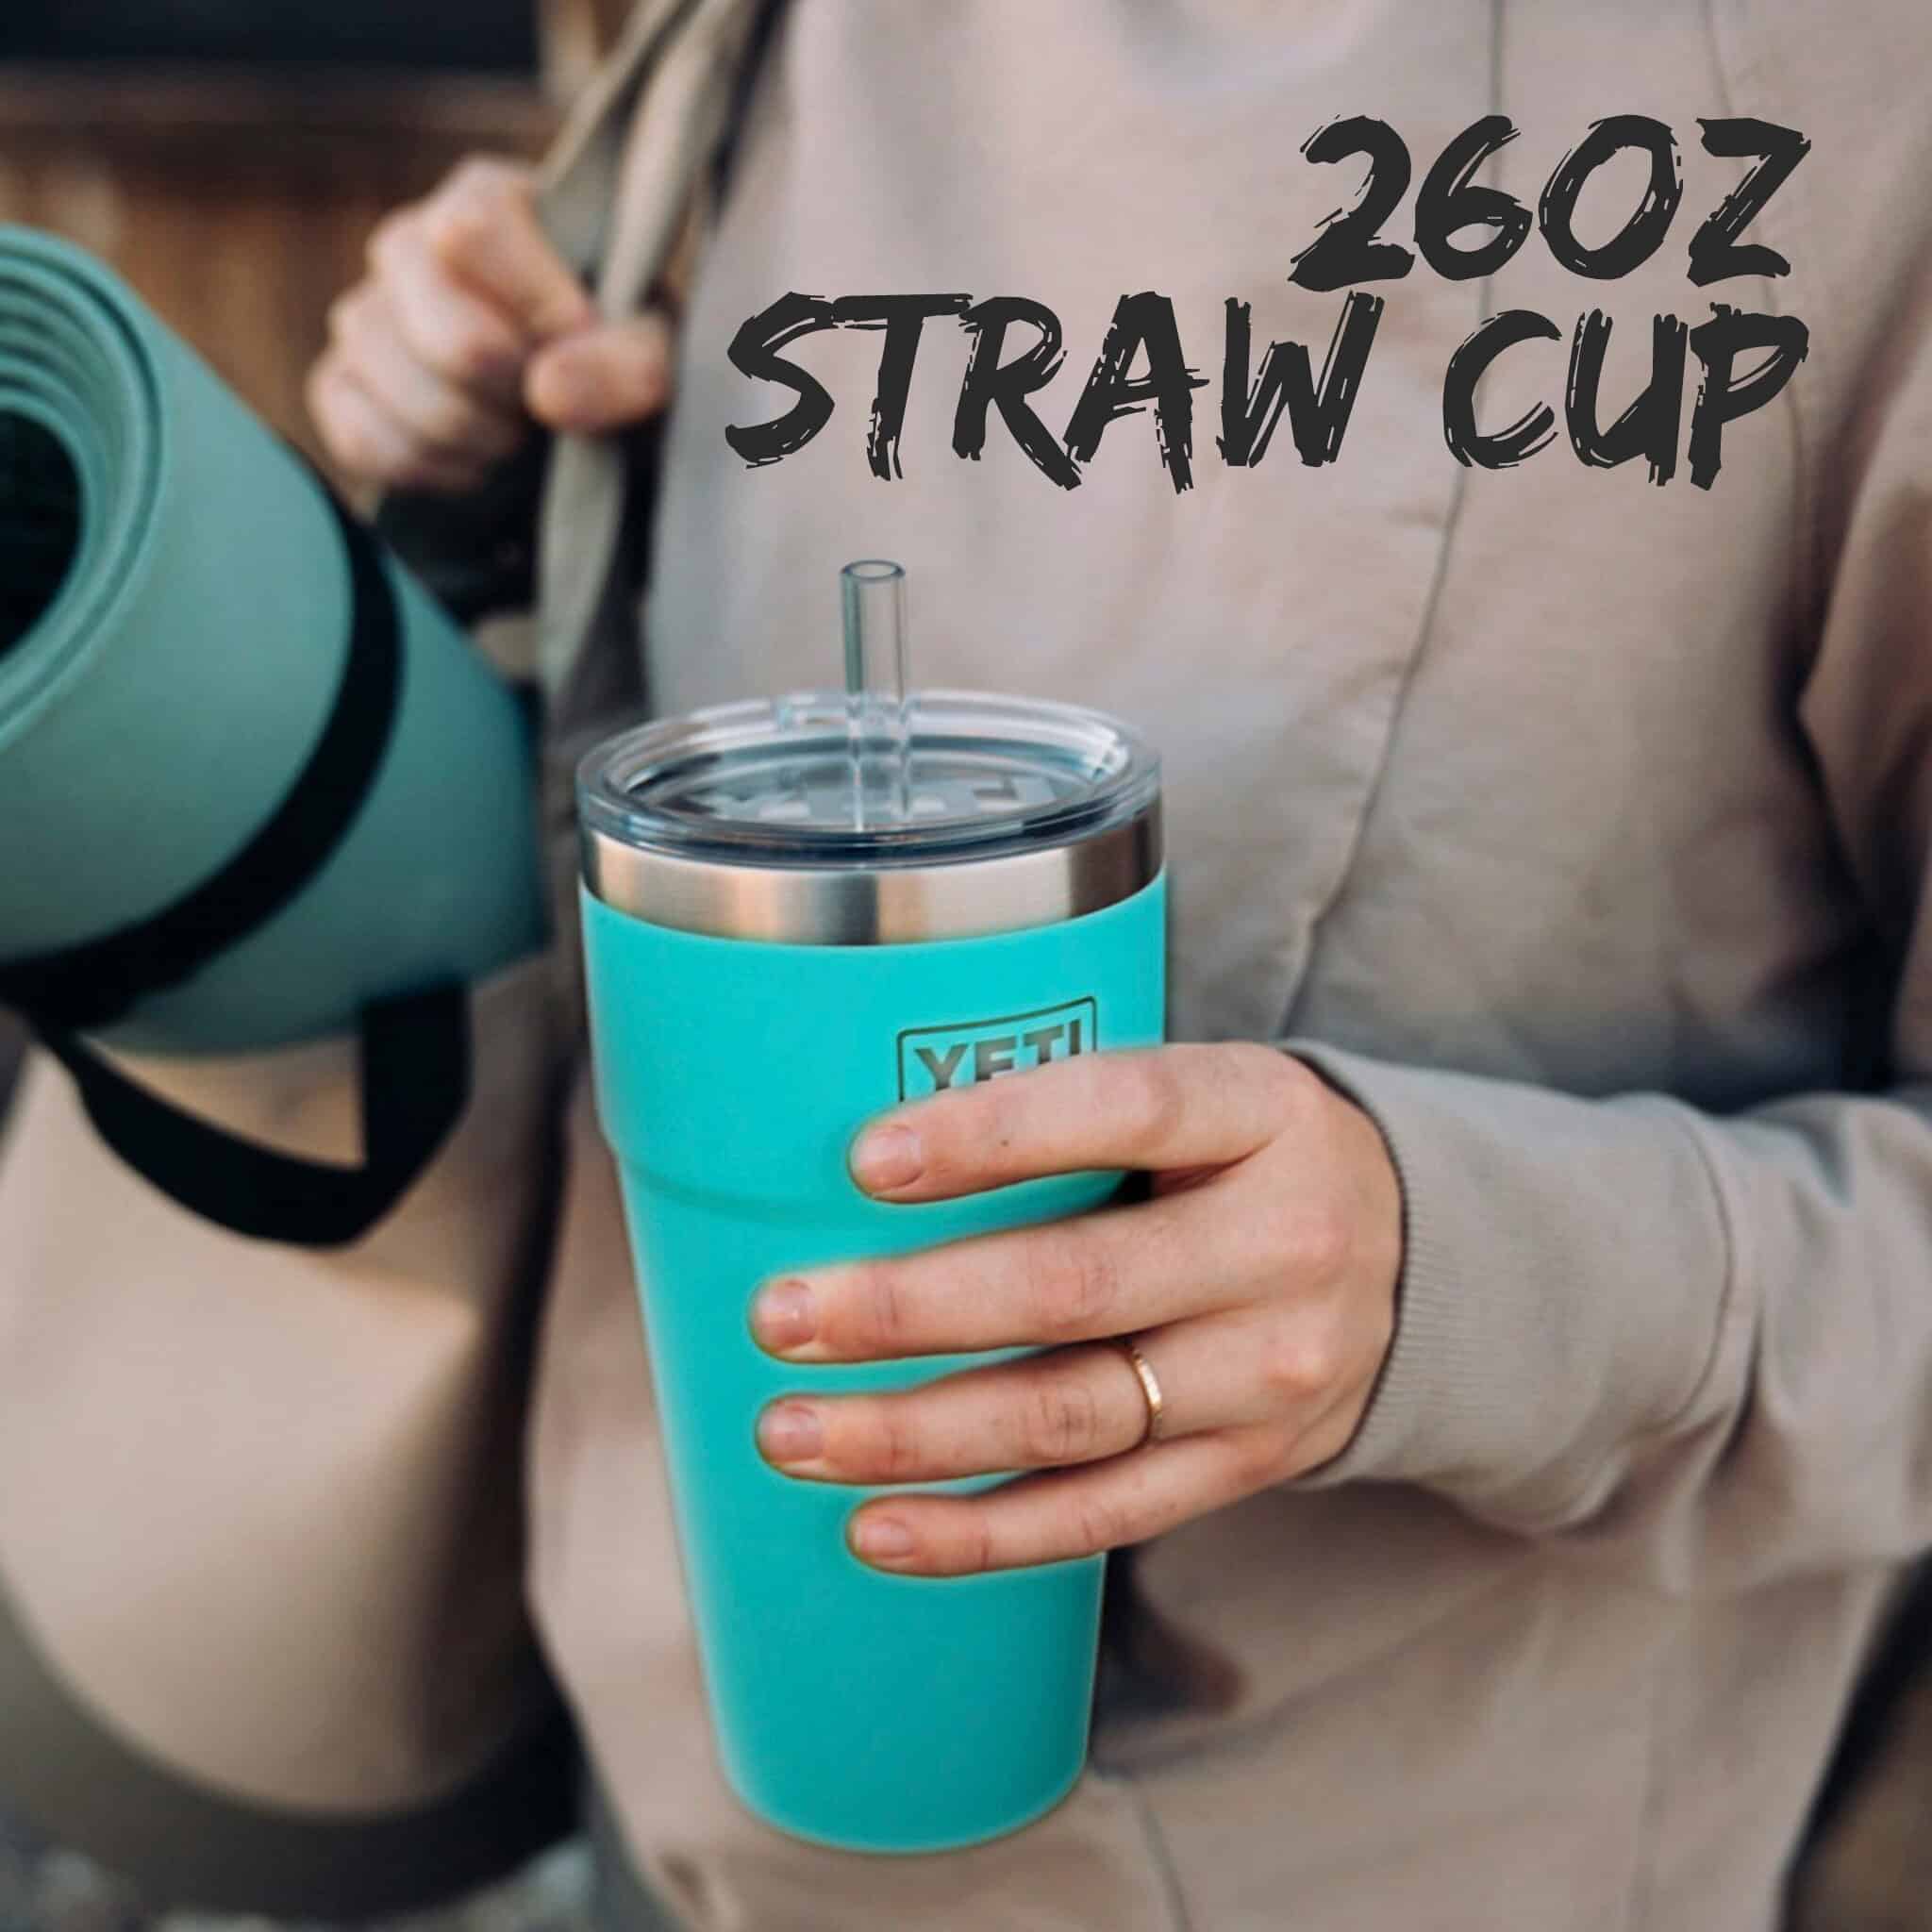 https://www.woodardmercantile.com/wp-content/uploads/2021/07/yeti-26oz-straw-cup-cover.jpg